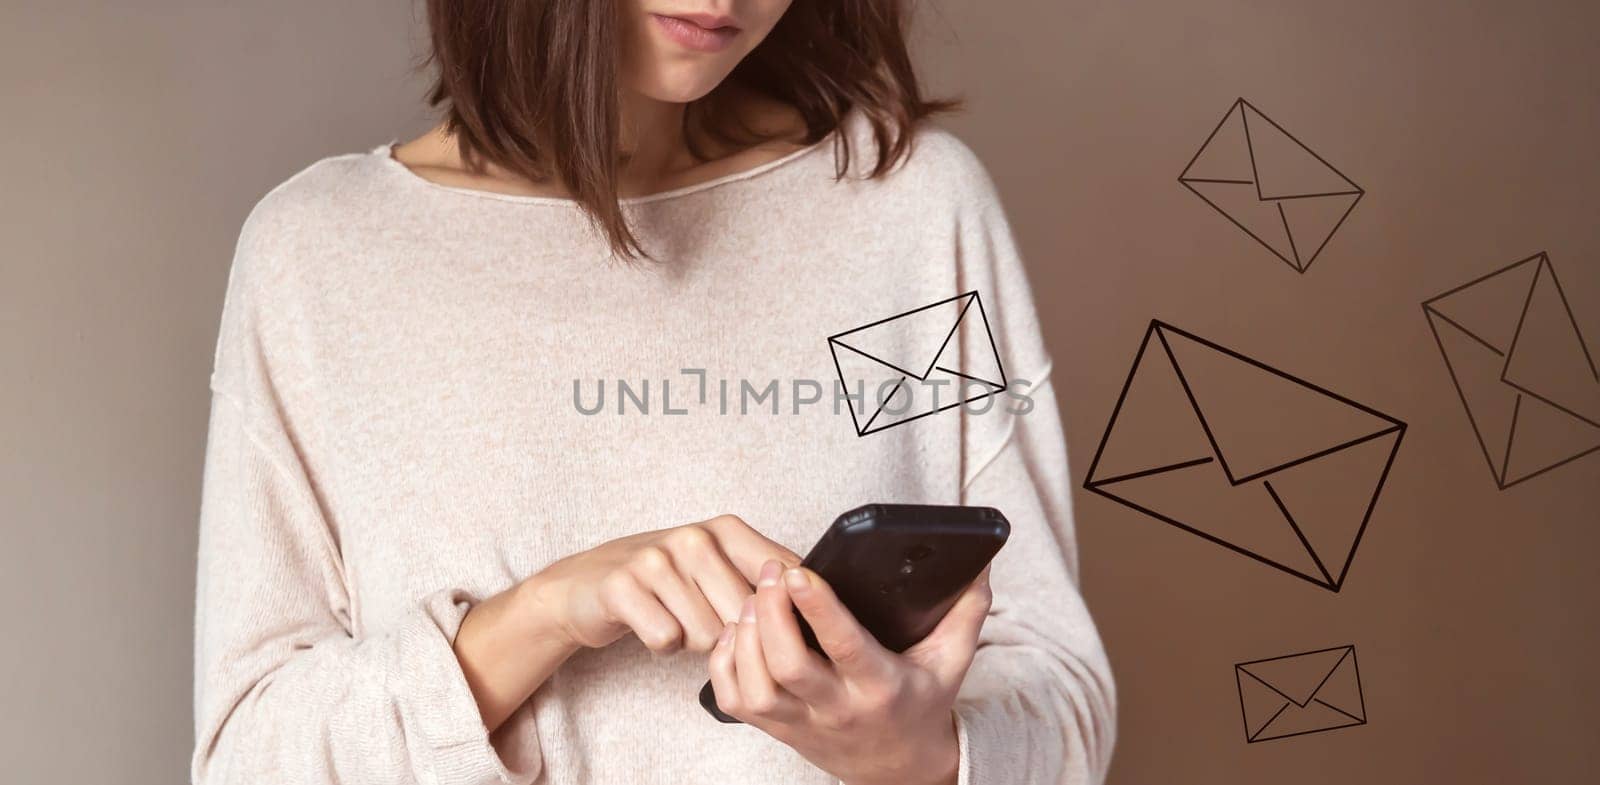 Young girl holds a smartphone in her hands and sends emails to friends, customers. Woman develops her business and communicates with people online, stylized letters are drawn over the mobile phone.